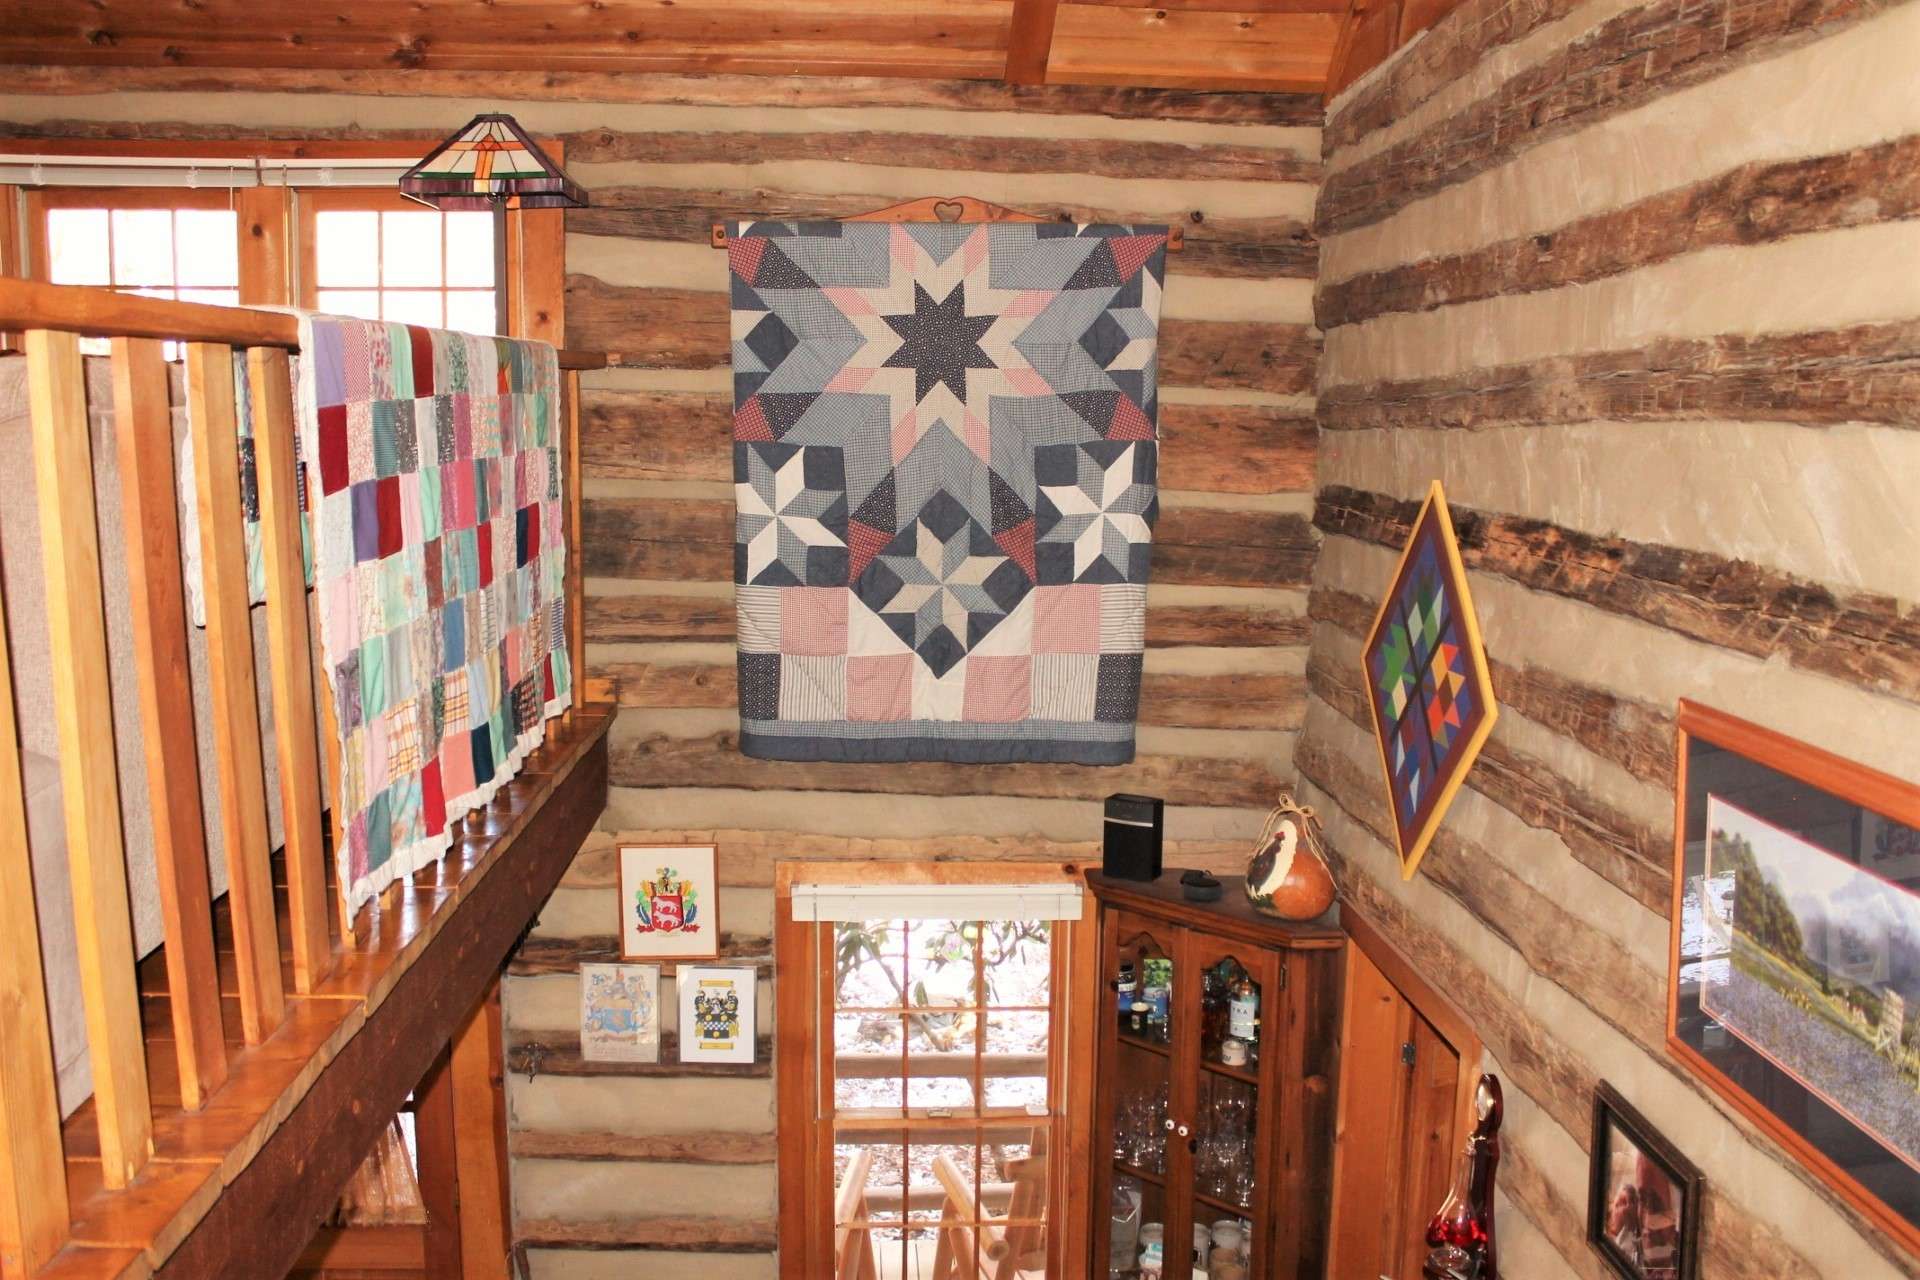 The antique log walls and railings display mountain art and quilts.